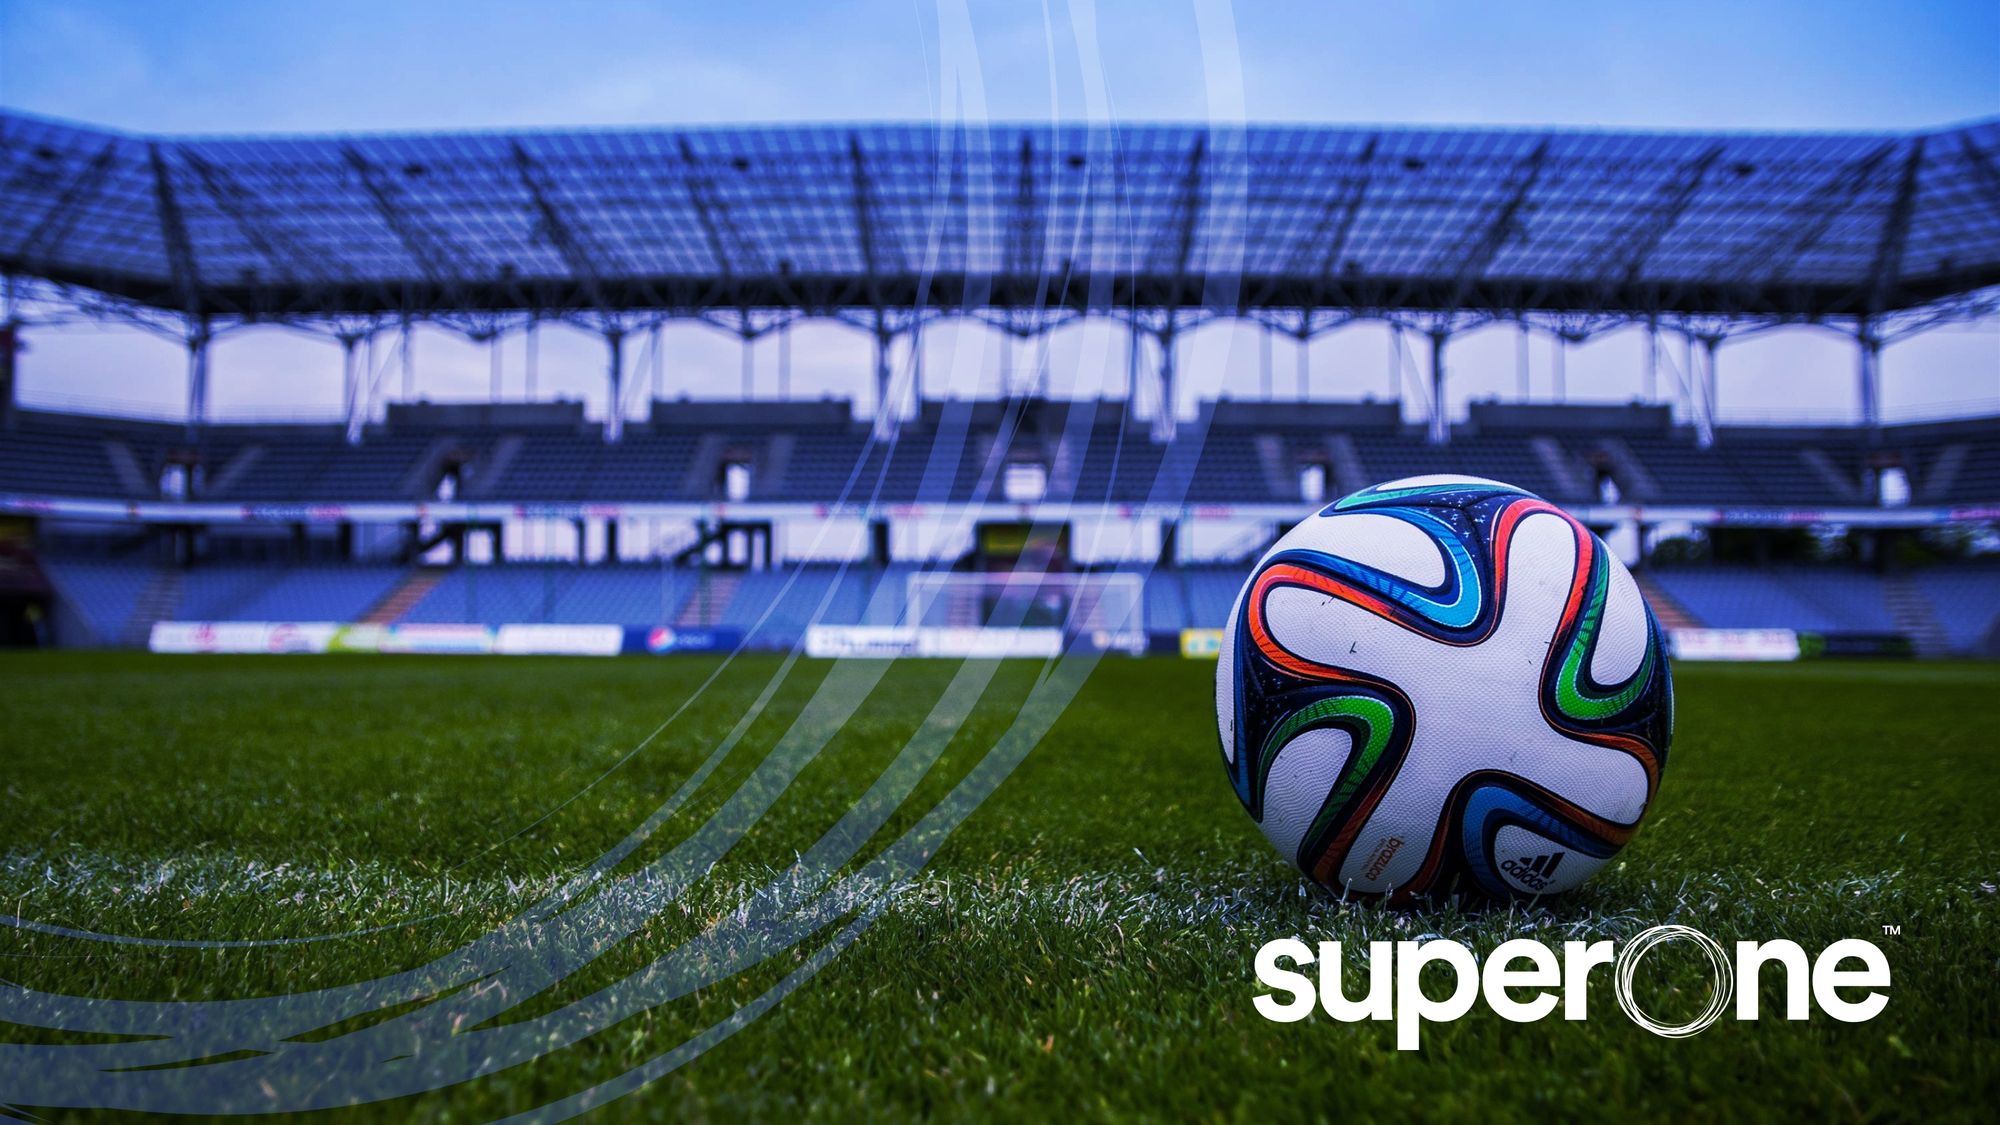 SuperOne enters the football space, Learning from FIFA (the game) and its market domination: